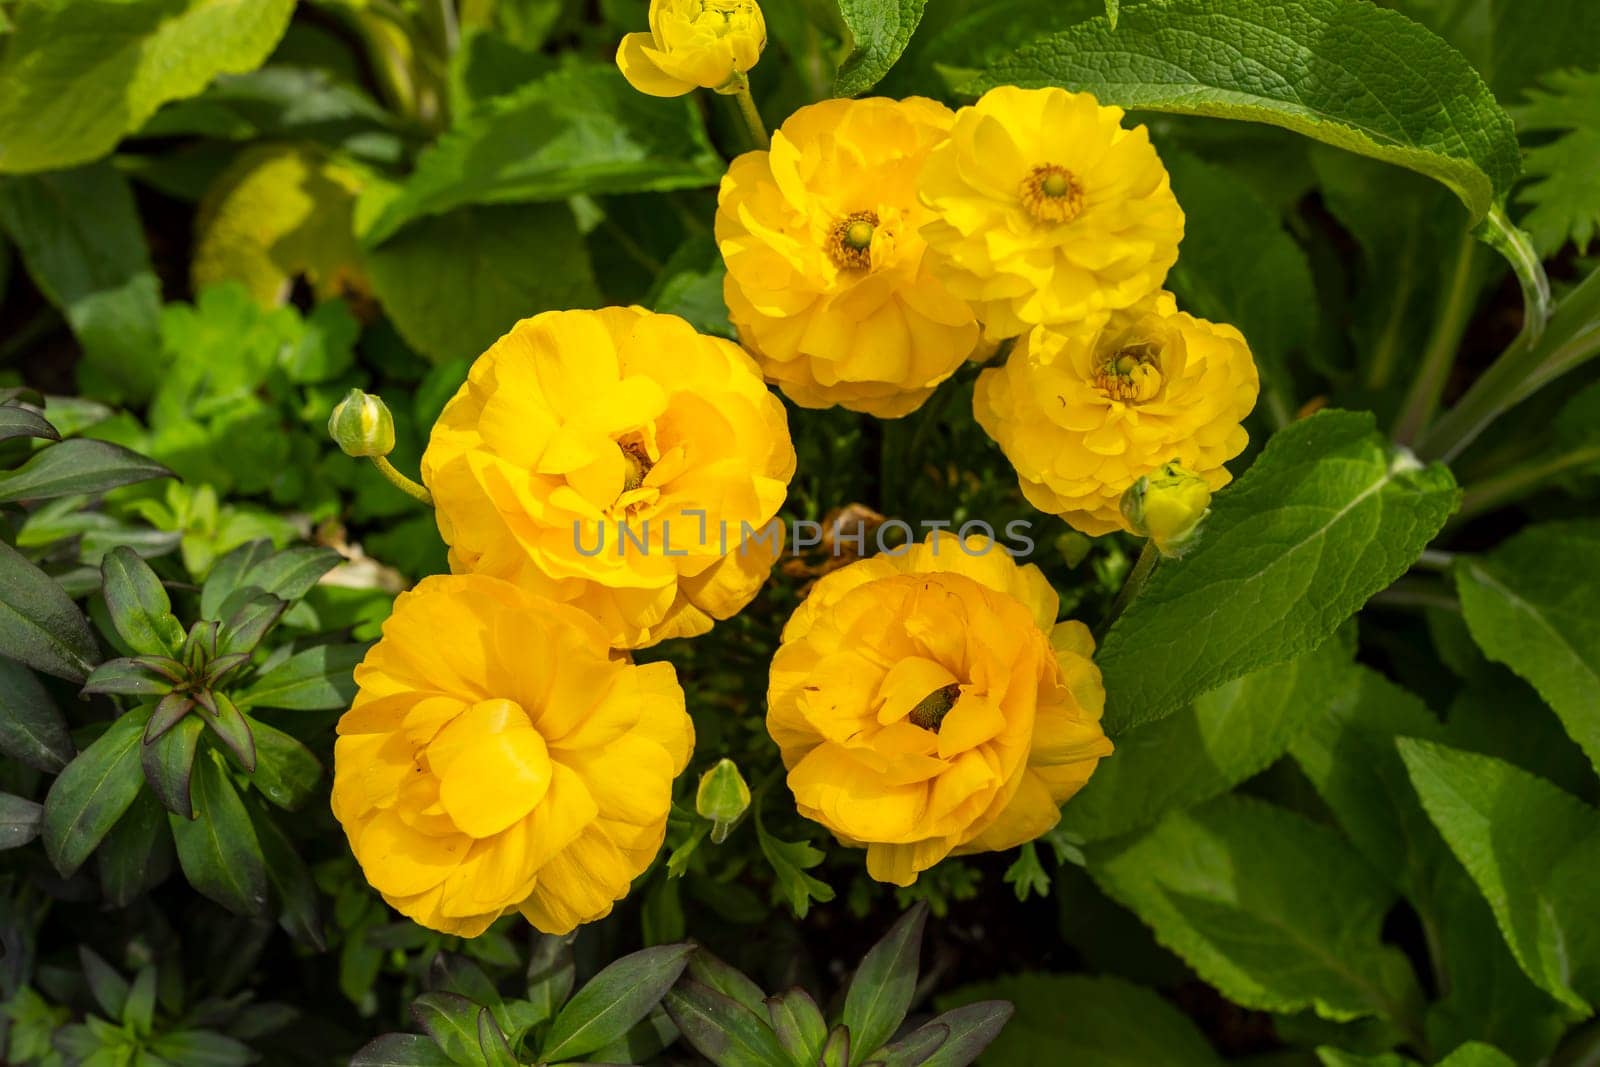 Yellow Bright Ranunculus Asiaticus or Rimmed Persian Buttercup Flower Outdoors In Garden Or Plant Nursery. Colorful Flowers, Botany, Floriculture. Horizontal Plane by netatsi